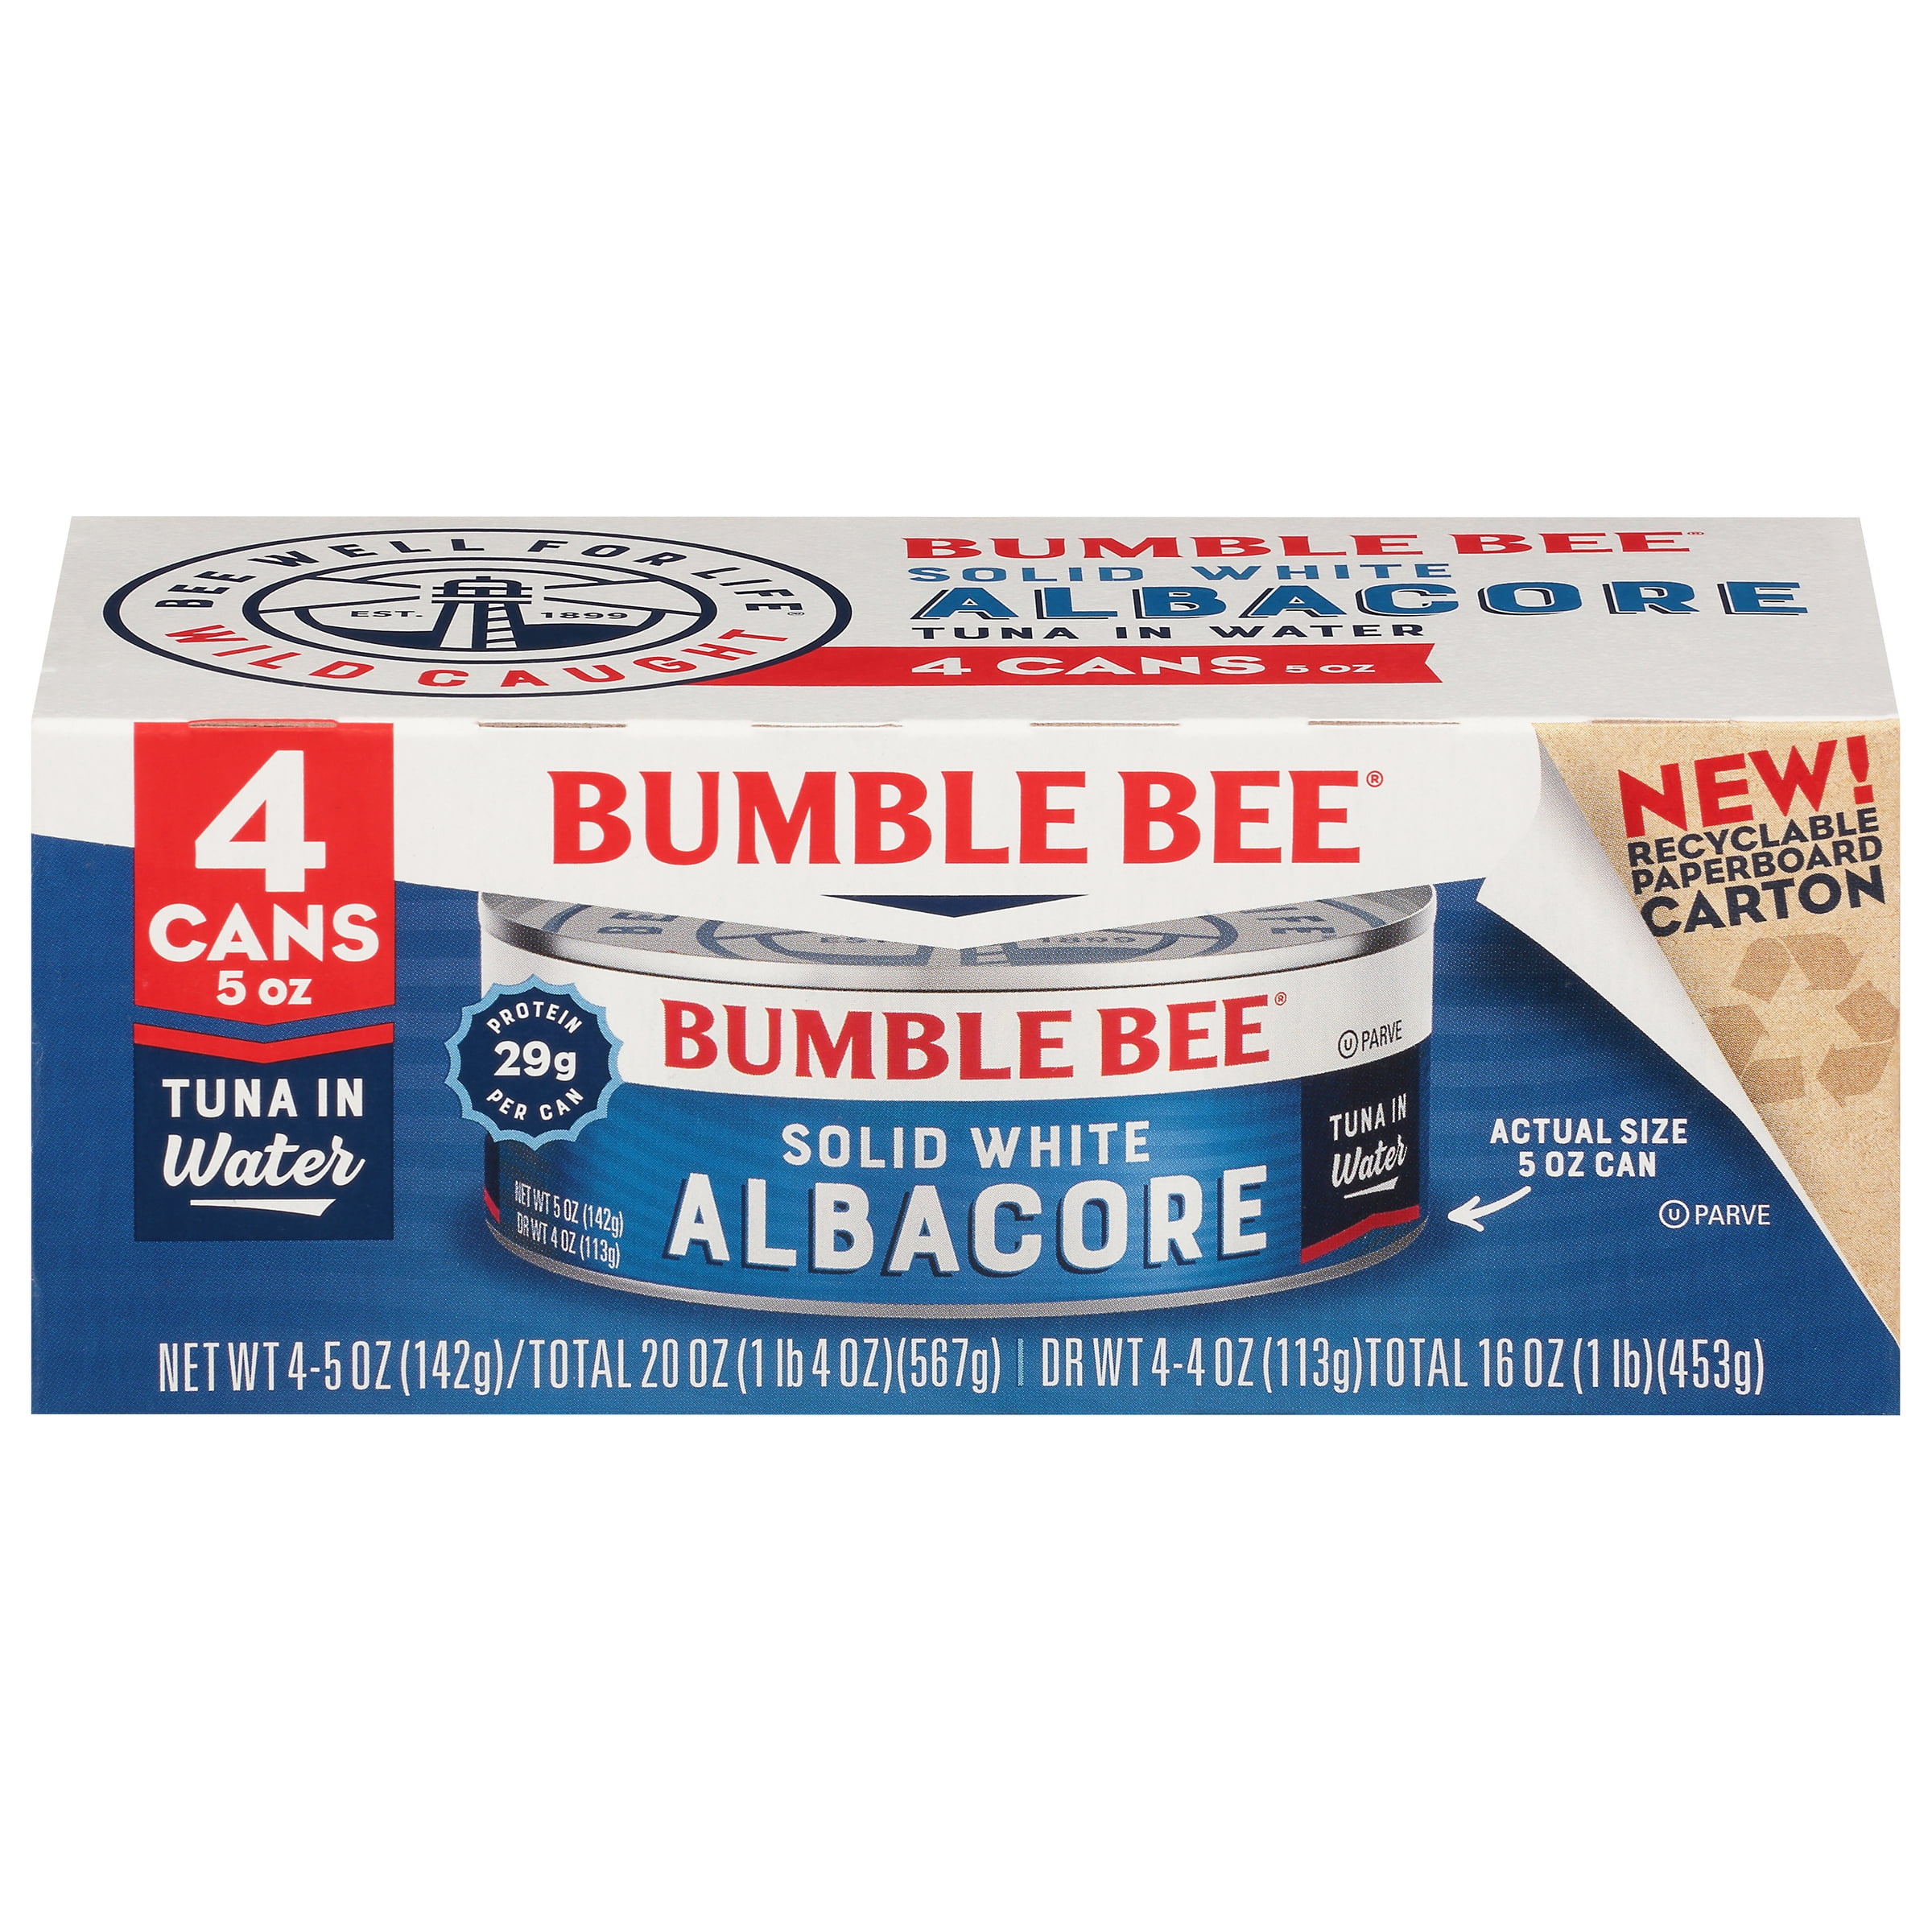 (Pack of 4) Bumble Bee Solid White Albacore Tuna in Water, 5oz